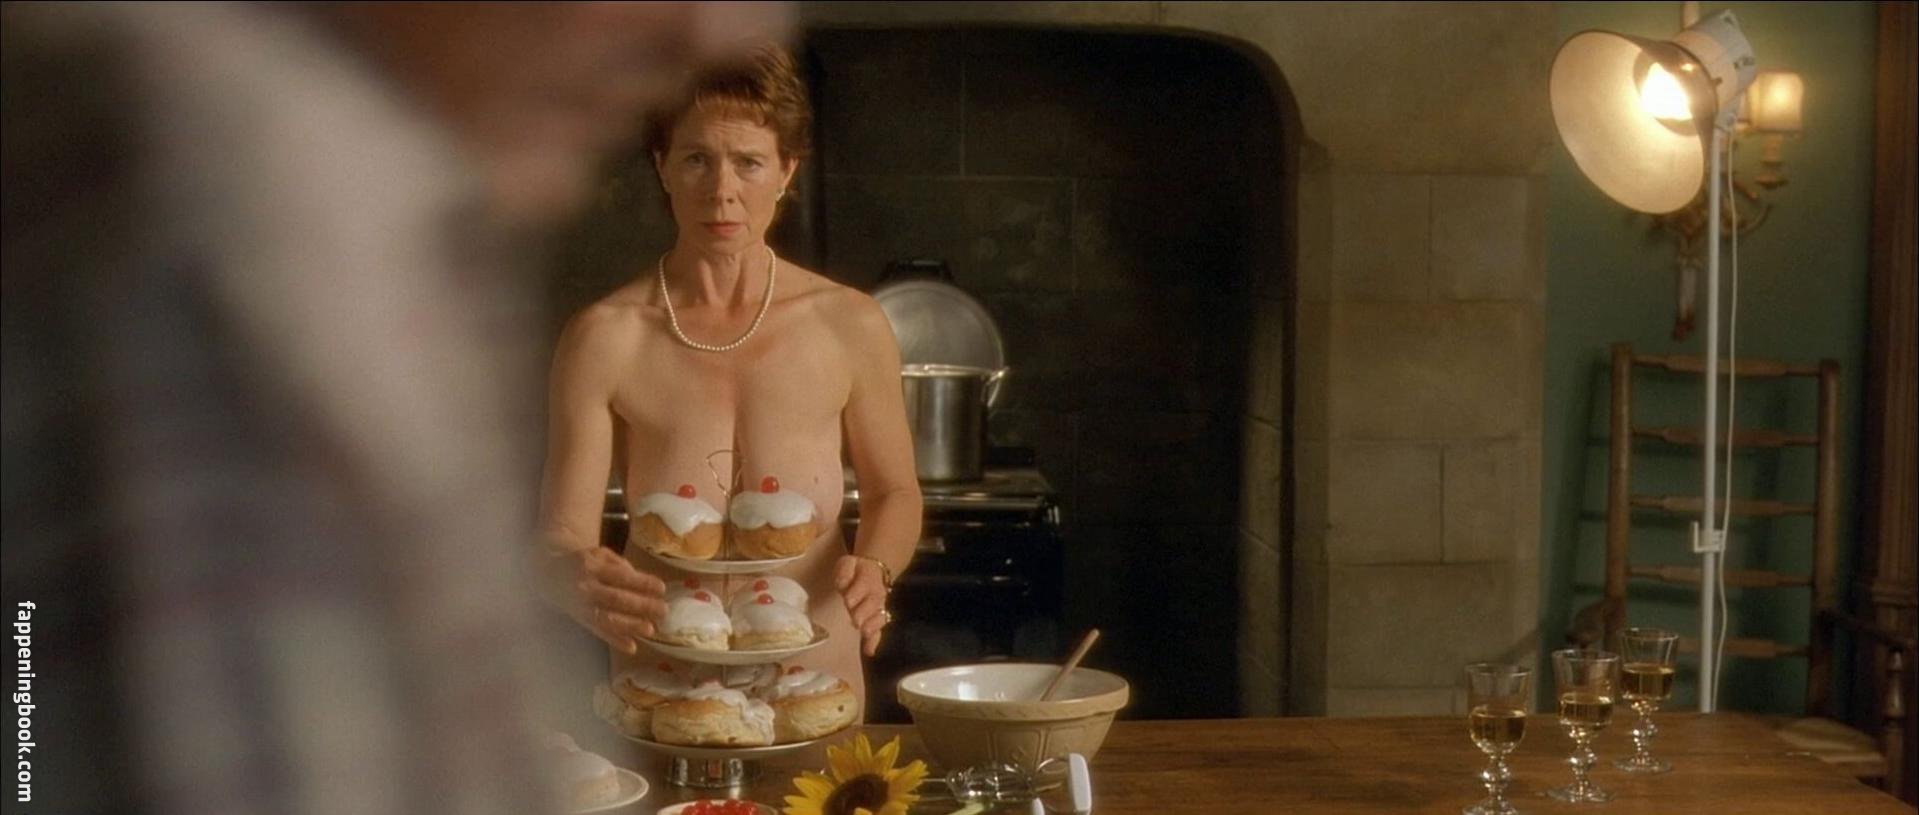 Celia Imrie's Topless Photoshoot: Steamy and Sensual!